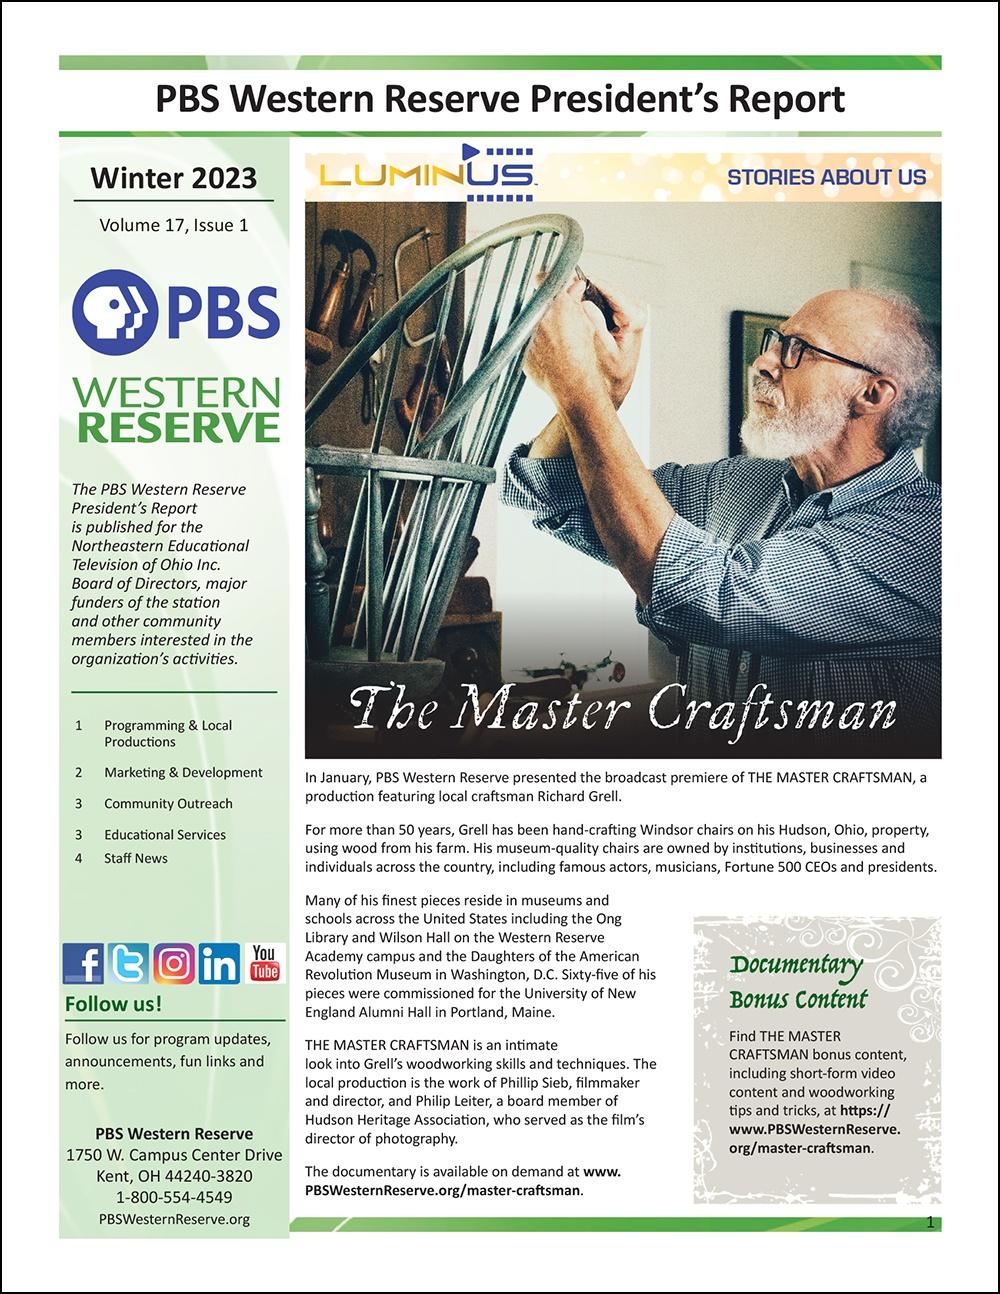 PBS Western Reserve President's Report - Winter 2023